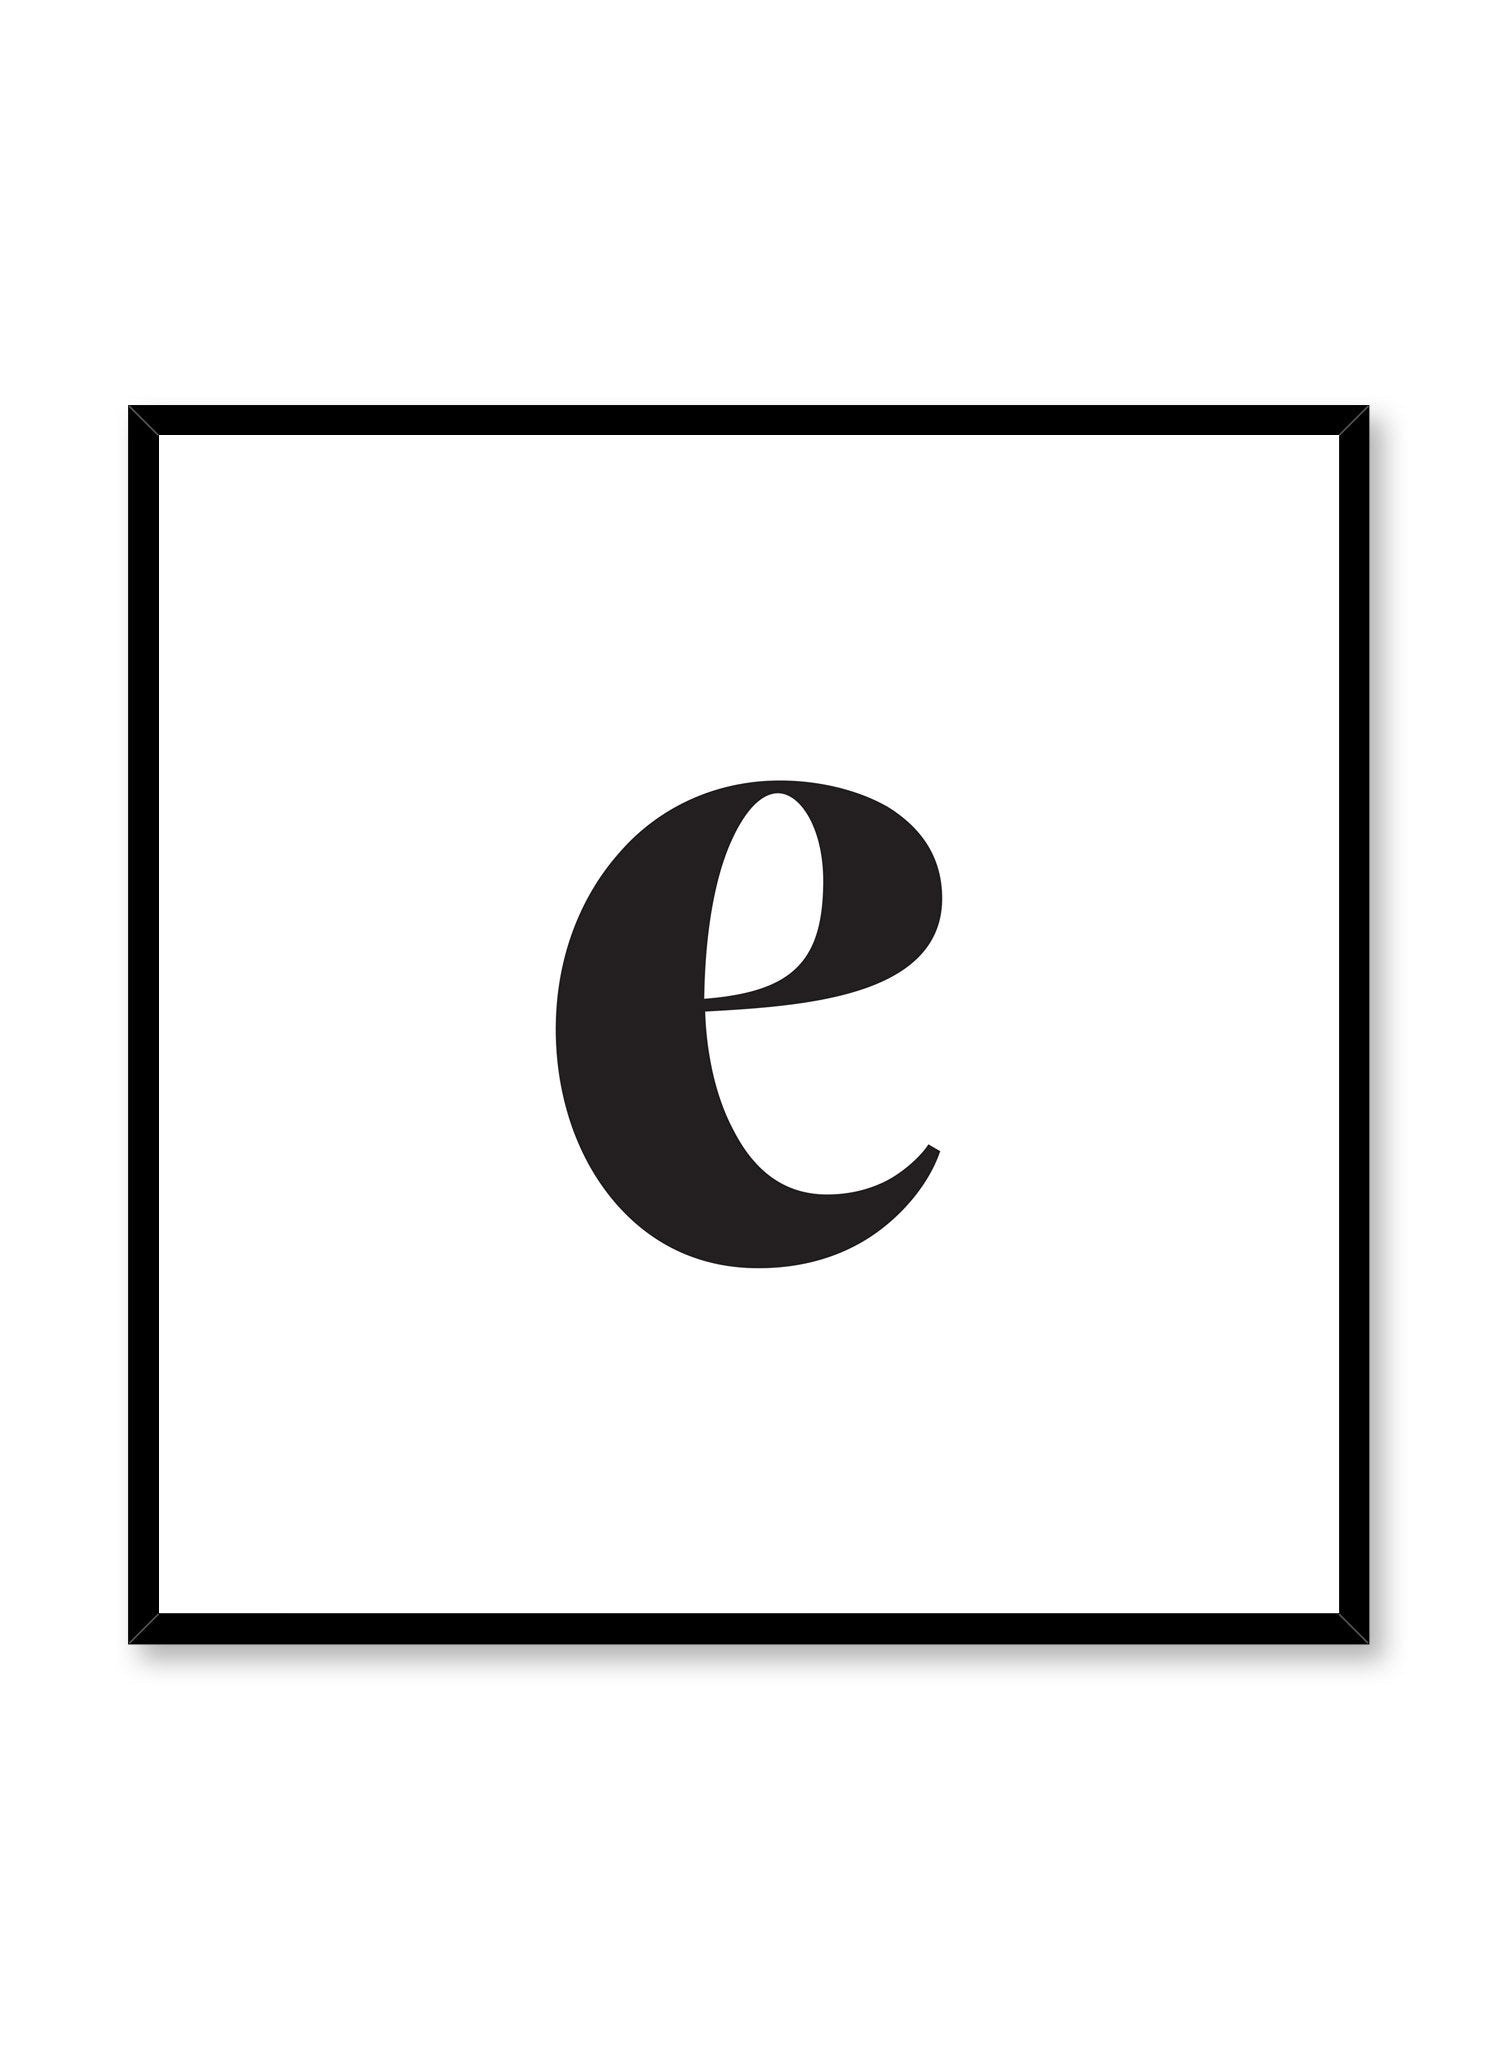 Scandinavian poster with black and white graphic typography design of lowercase letter E by Opposite Wall